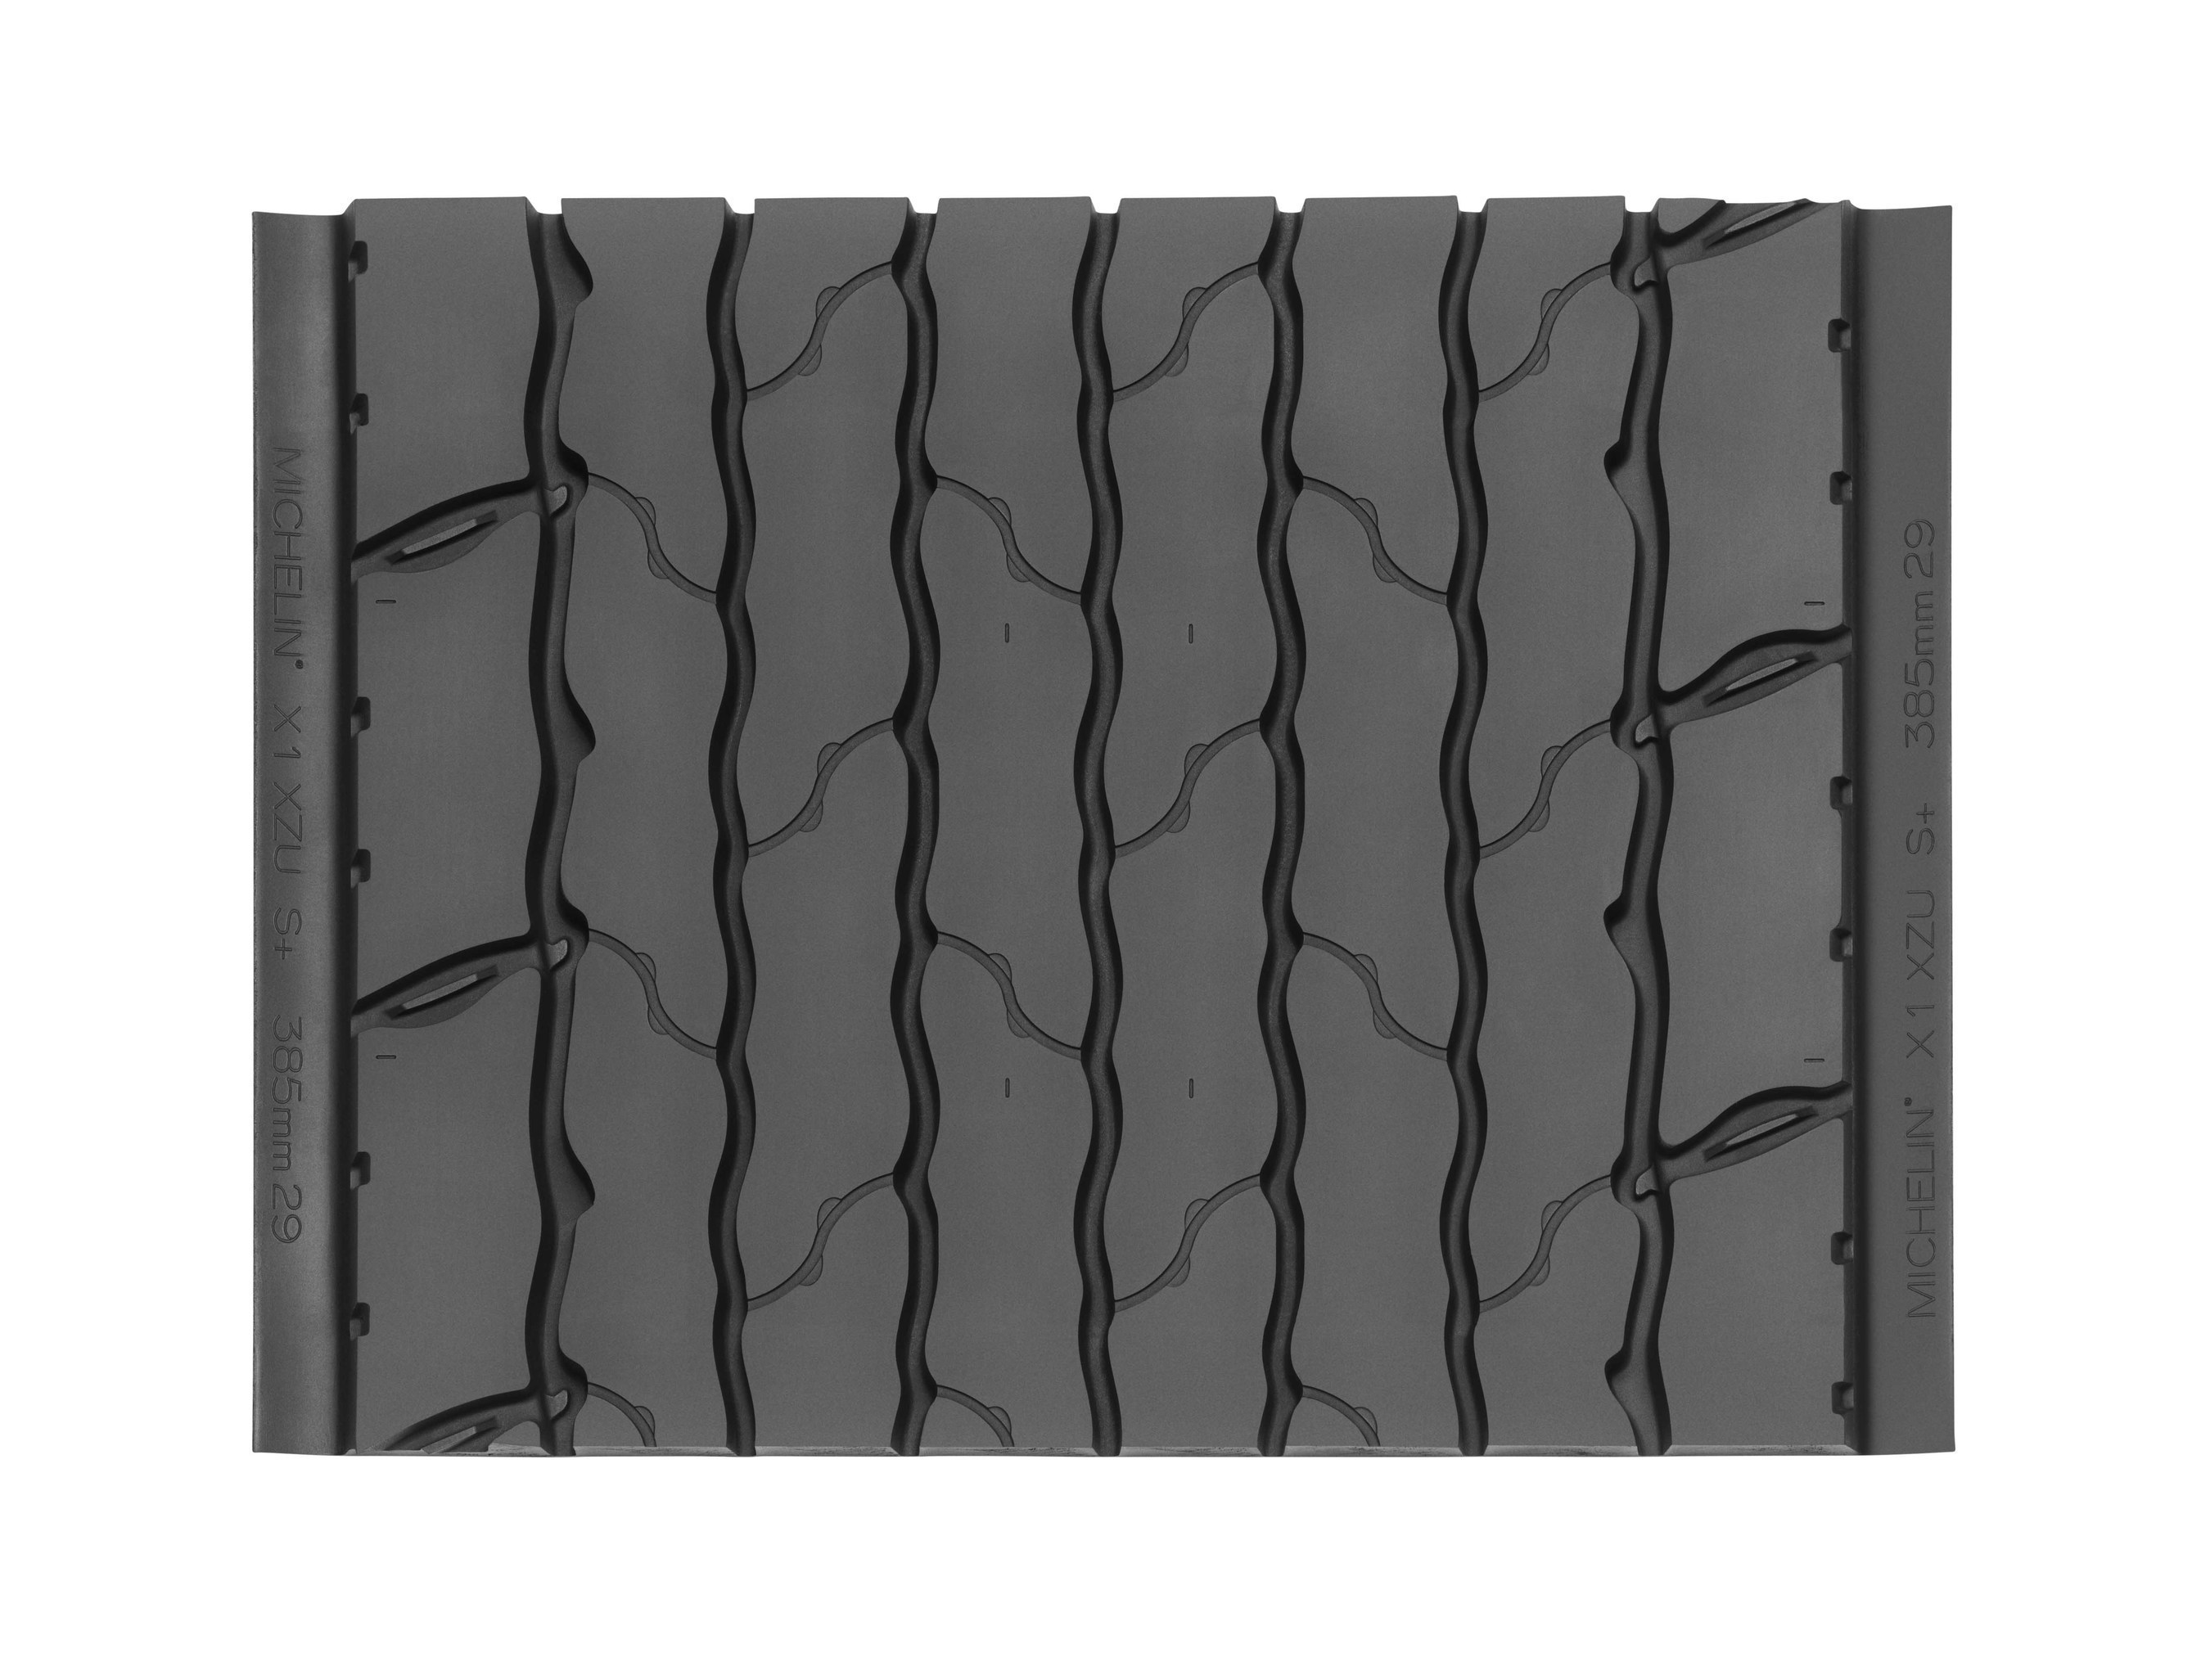 The MICHELIN X ONE XZUS+ Pre-Mold retread -- an industry-leading, all-position, next-generation wide-base single -- for waste and refuse trucks that operate in demanding urban environments.